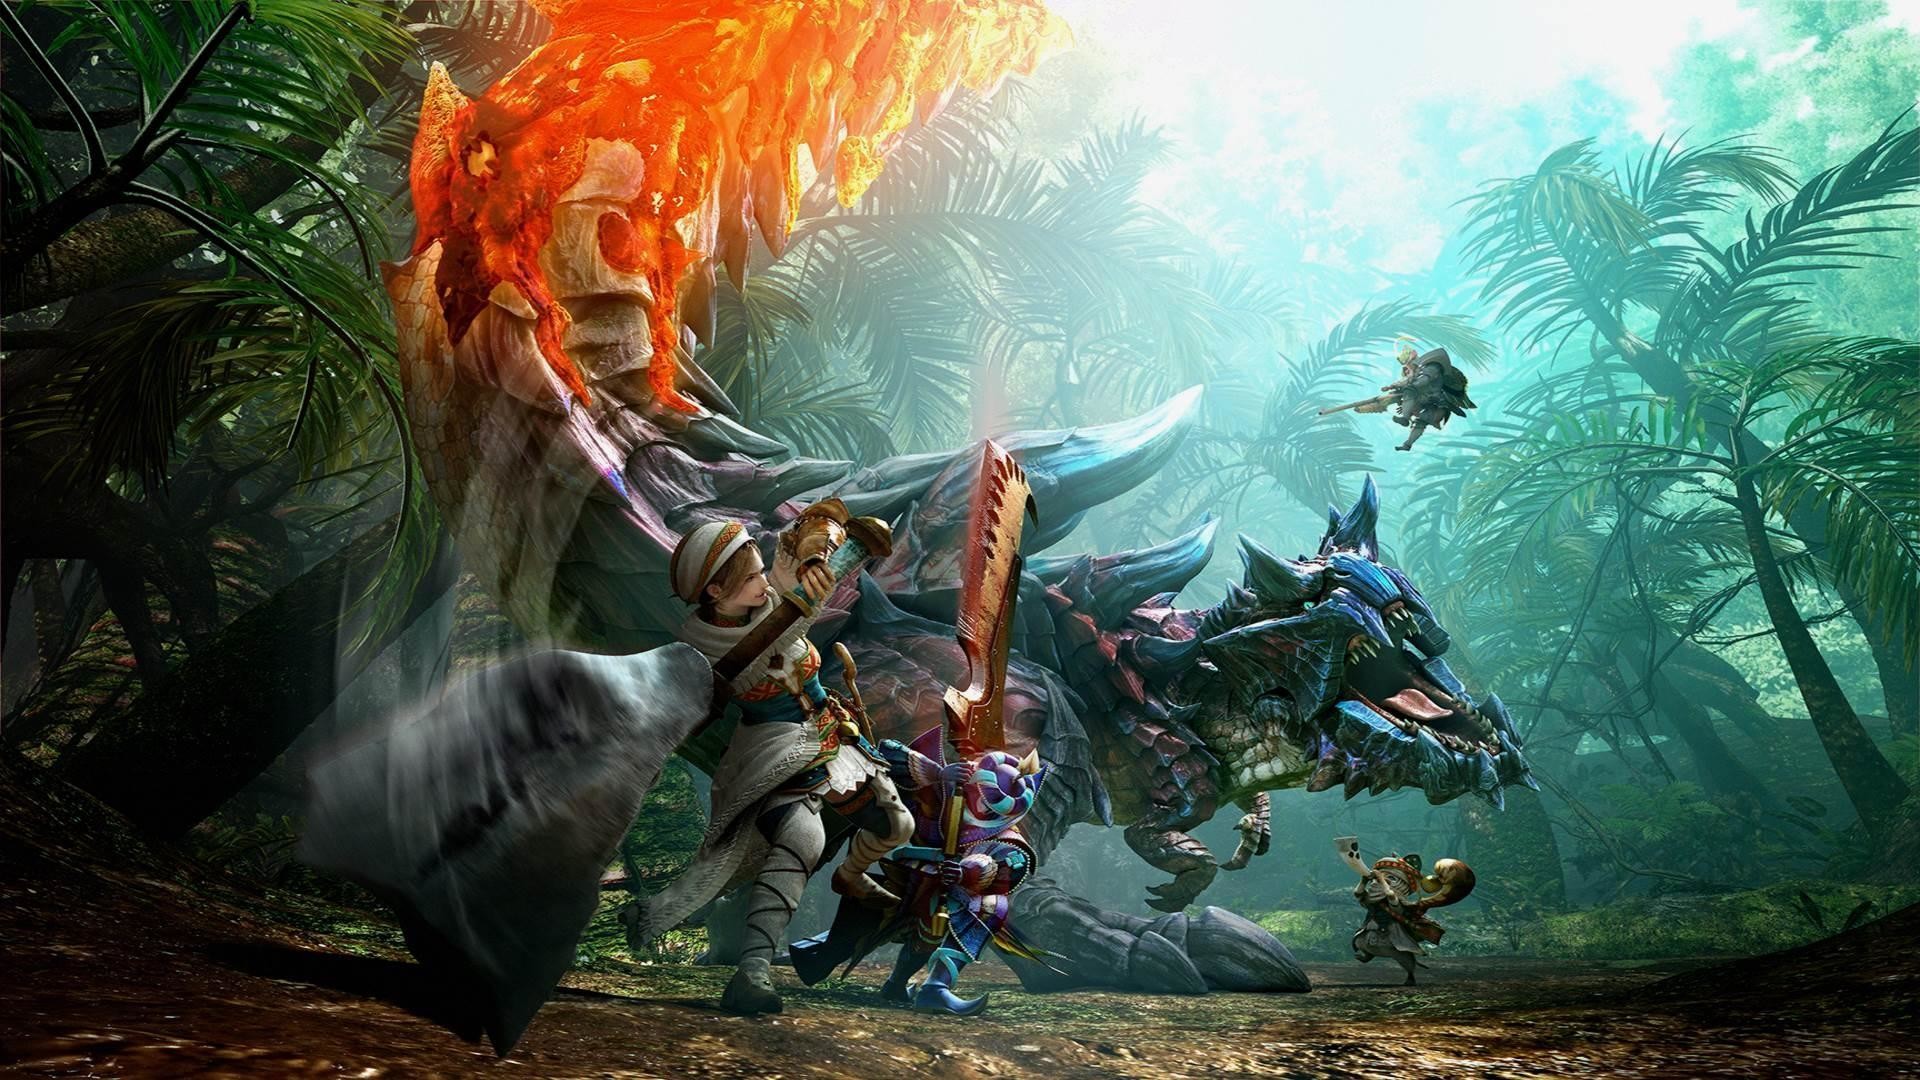 1920x1080 Monster-Hunter-HD-and-Backgrounds-1920%C3%971080-